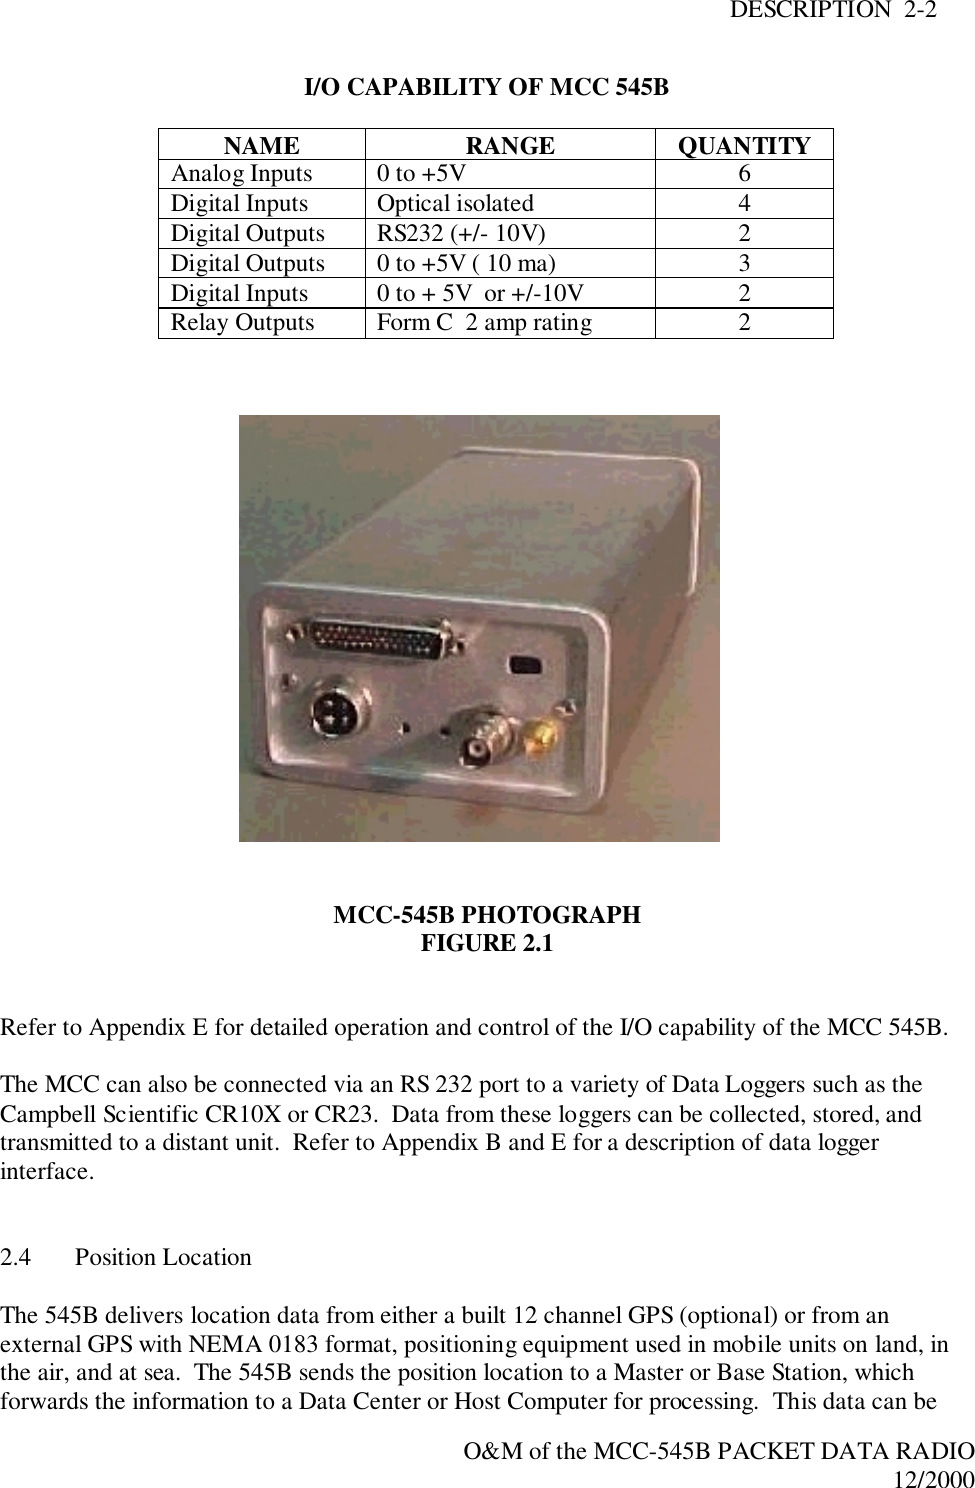 DESCRIPTION  2-2O&amp;M of the MCC-545B PACKET DATA RADIO12/2000I/O CAPABILITY OF MCC 545BNAME RANGE QUANTITYAnalog Inputs 0 to +5V 6Digital Inputs Optical isolated 4Digital Outputs RS232 (+/- 10V) 2Digital Outputs 0 to +5V ( 10 ma) 3Digital Inputs 0 to + 5V  or +/-10V 2Relay Outputs Form C  2 amp rating 2MCC-545B PHOTOGRAPHFIGURE 2.1Refer to Appendix E for detailed operation and control of the I/O capability of the MCC 545B.The MCC can also be connected via an RS 232 port to a variety of Data Loggers such as theCampbell Scientific CR10X or CR23.  Data from these loggers can be collected, stored, andtransmitted to a distant unit.  Refer to Appendix B and E for a description of data loggerinterface.2.4 Position LocationThe 545B delivers location data from either a built 12 channel GPS (optional) or from anexternal GPS with NEMA 0183 format, positioning equipment used in mobile units on land, inthe air, and at sea.  The 545B sends the position location to a Master or Base Station, whichforwards the information to a Data Center or Host Computer for processing.  This data can be